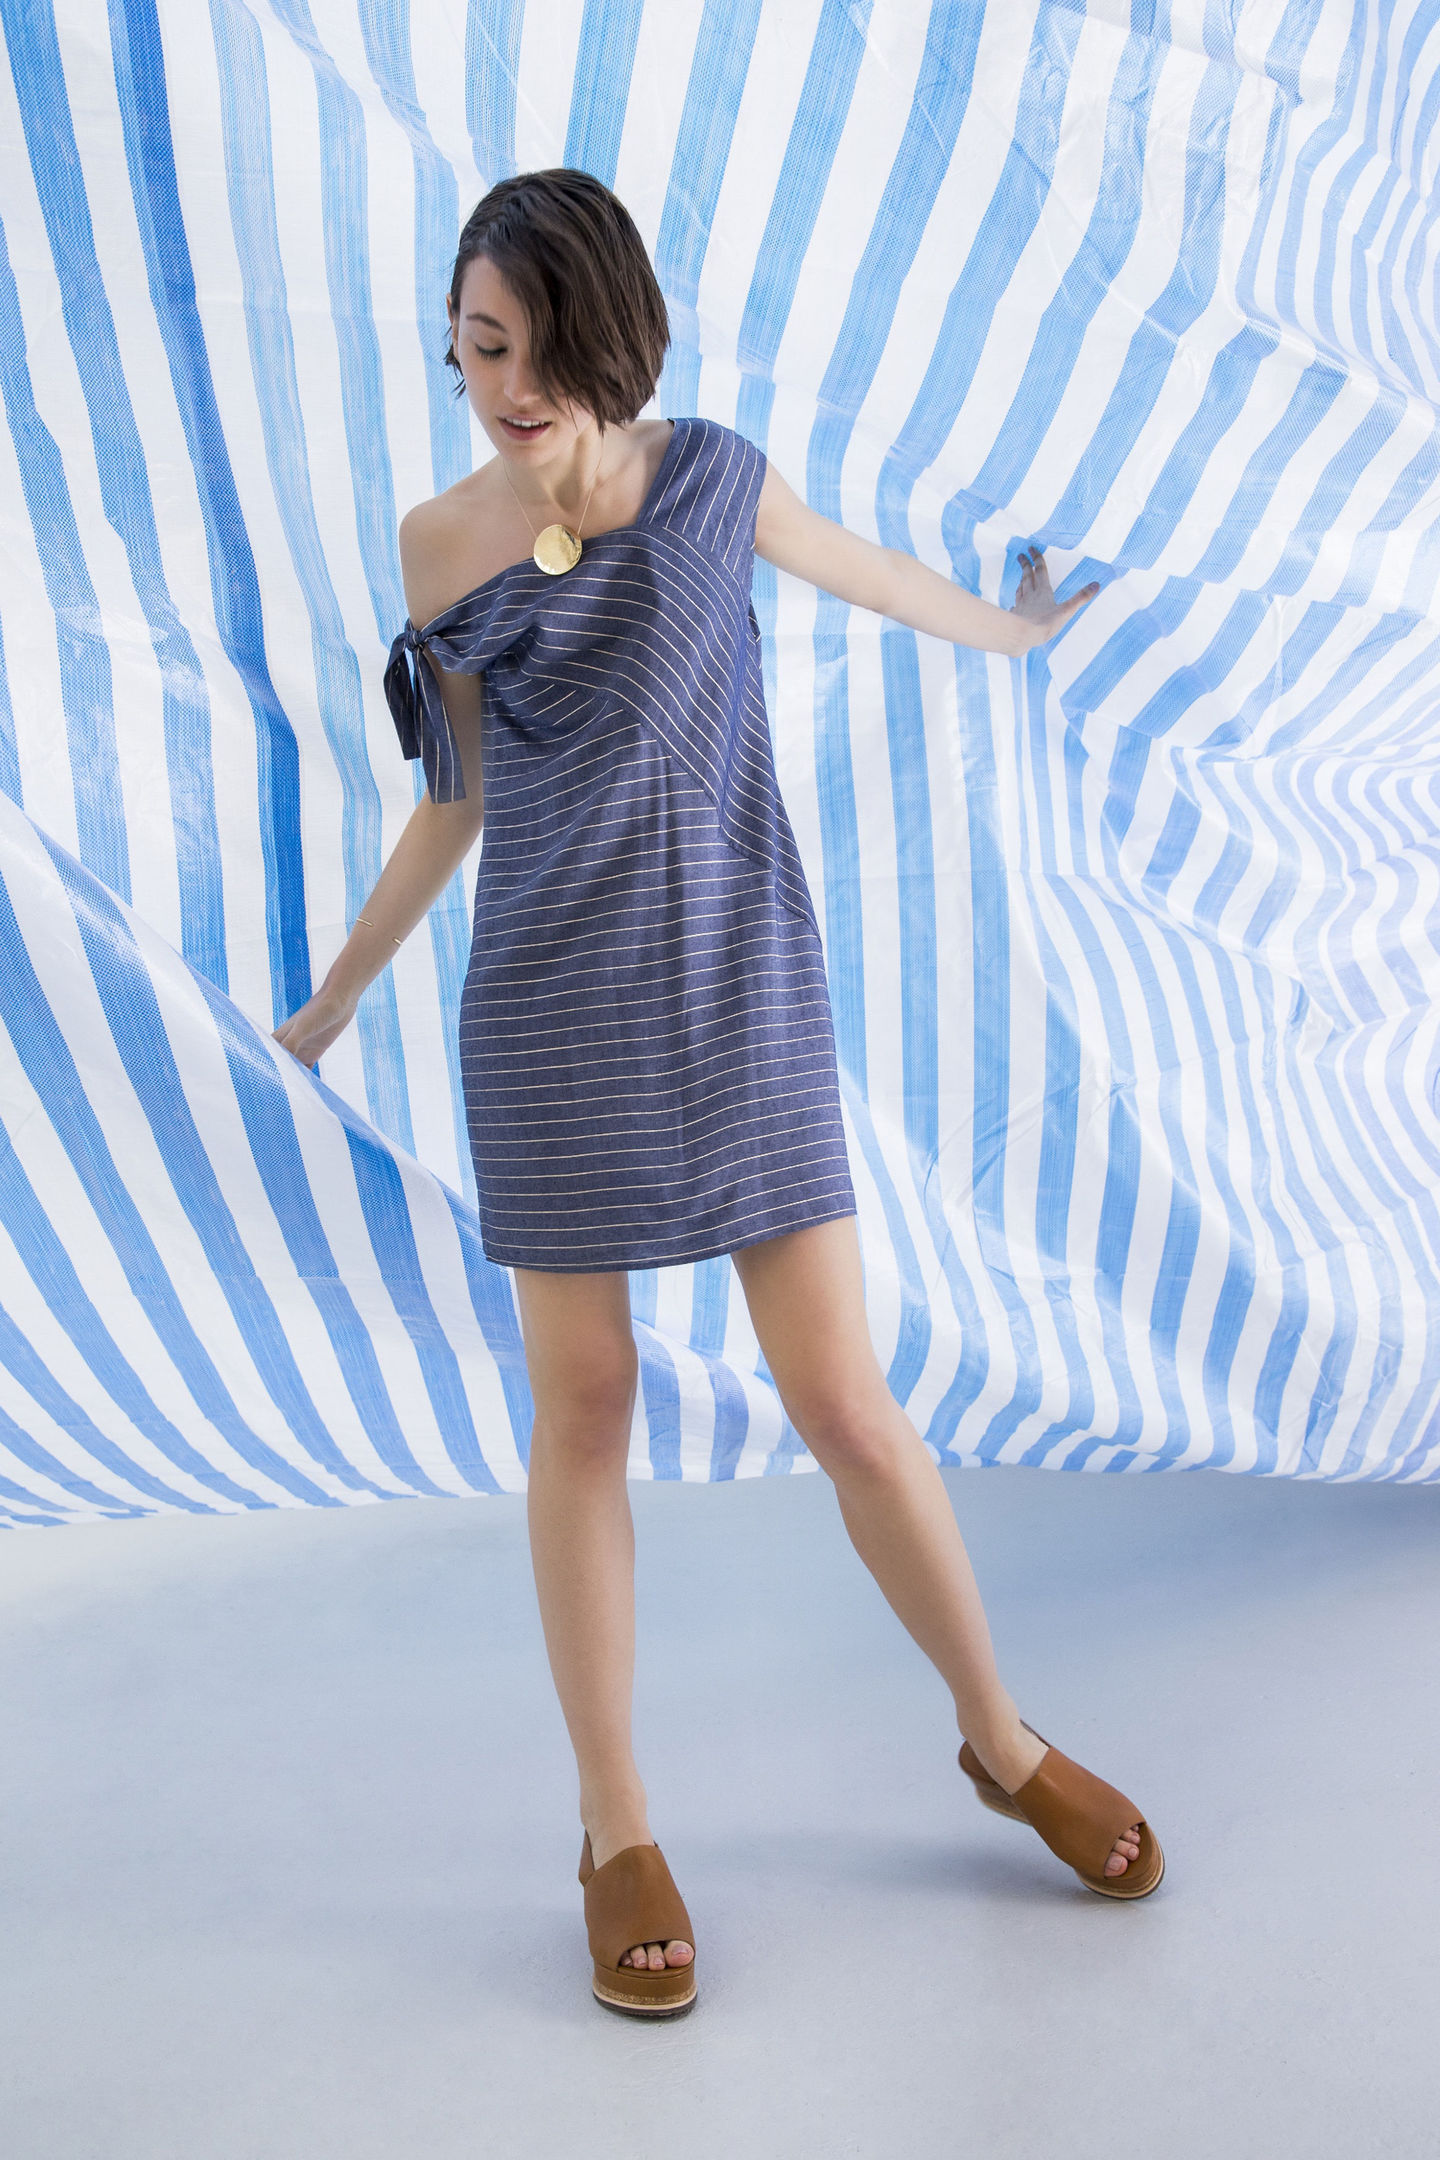 Undated Handout Photo of a model wearing the Oliver Bonas Absorb Asymmetric Stripe Dress, available from oliverbonas.com. See PA Feature FASHION Stripes. Picture credit should read: PA Photo/Handout. WARNING: This picture must only be used to accompany PA Feature FASHION Stripes. WARNING: This picture must only be used with the full product information as stated above.